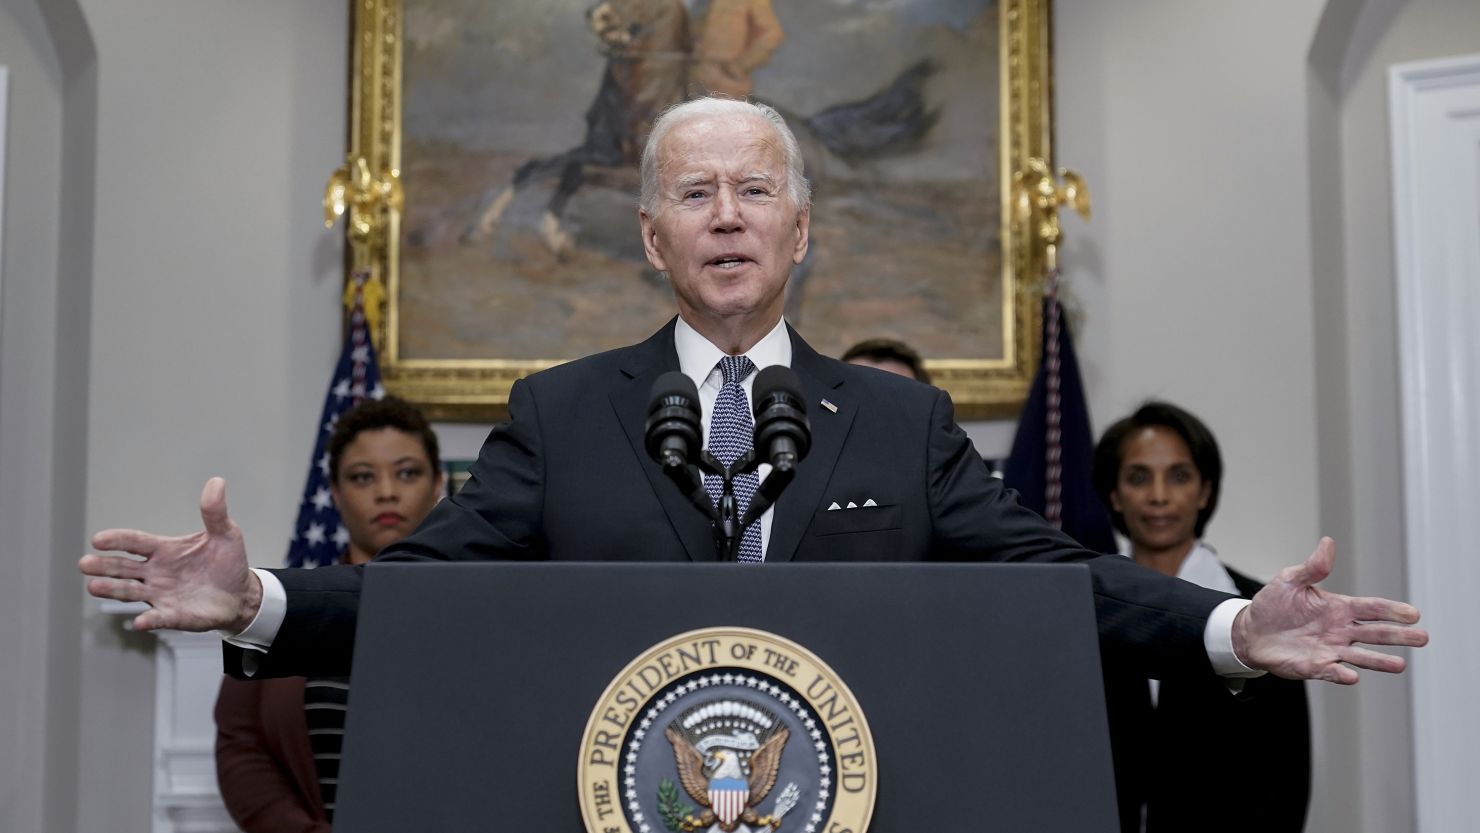 President Joe Biden speaks about deficit reduction at the White House on October 21, 2022.